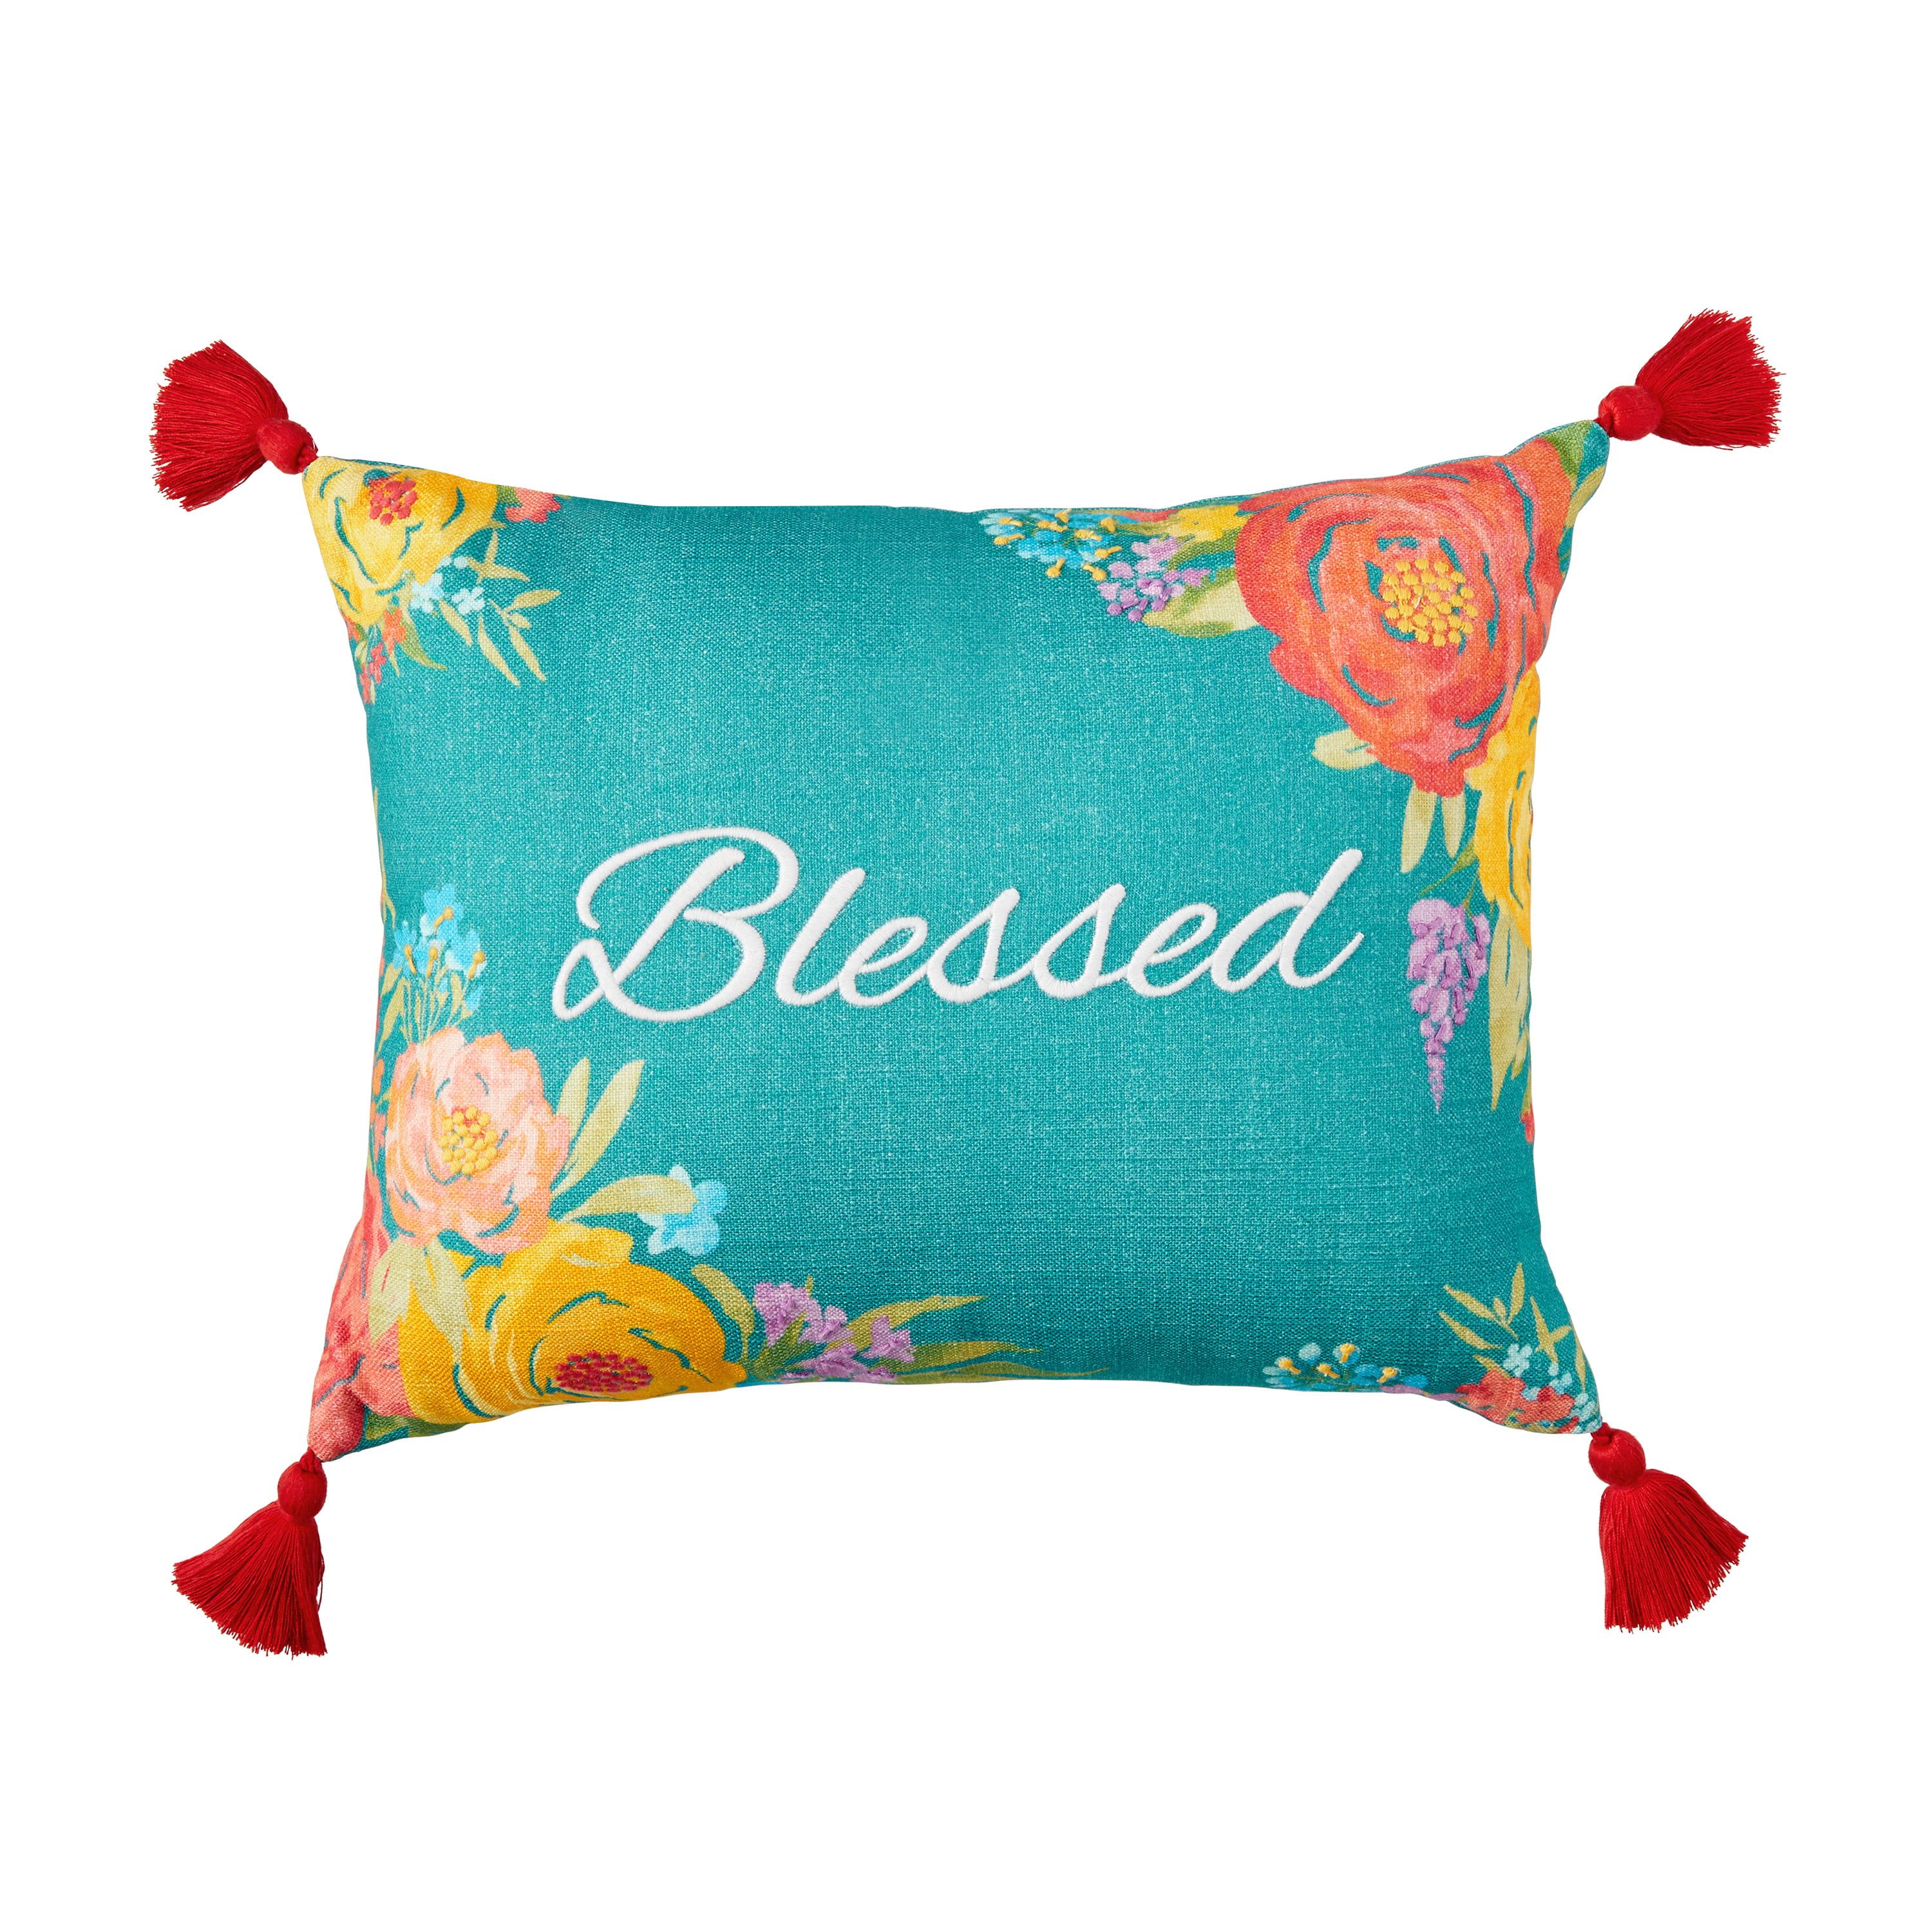 The Pioneer Woman 'Blessed' Decorative Pillow